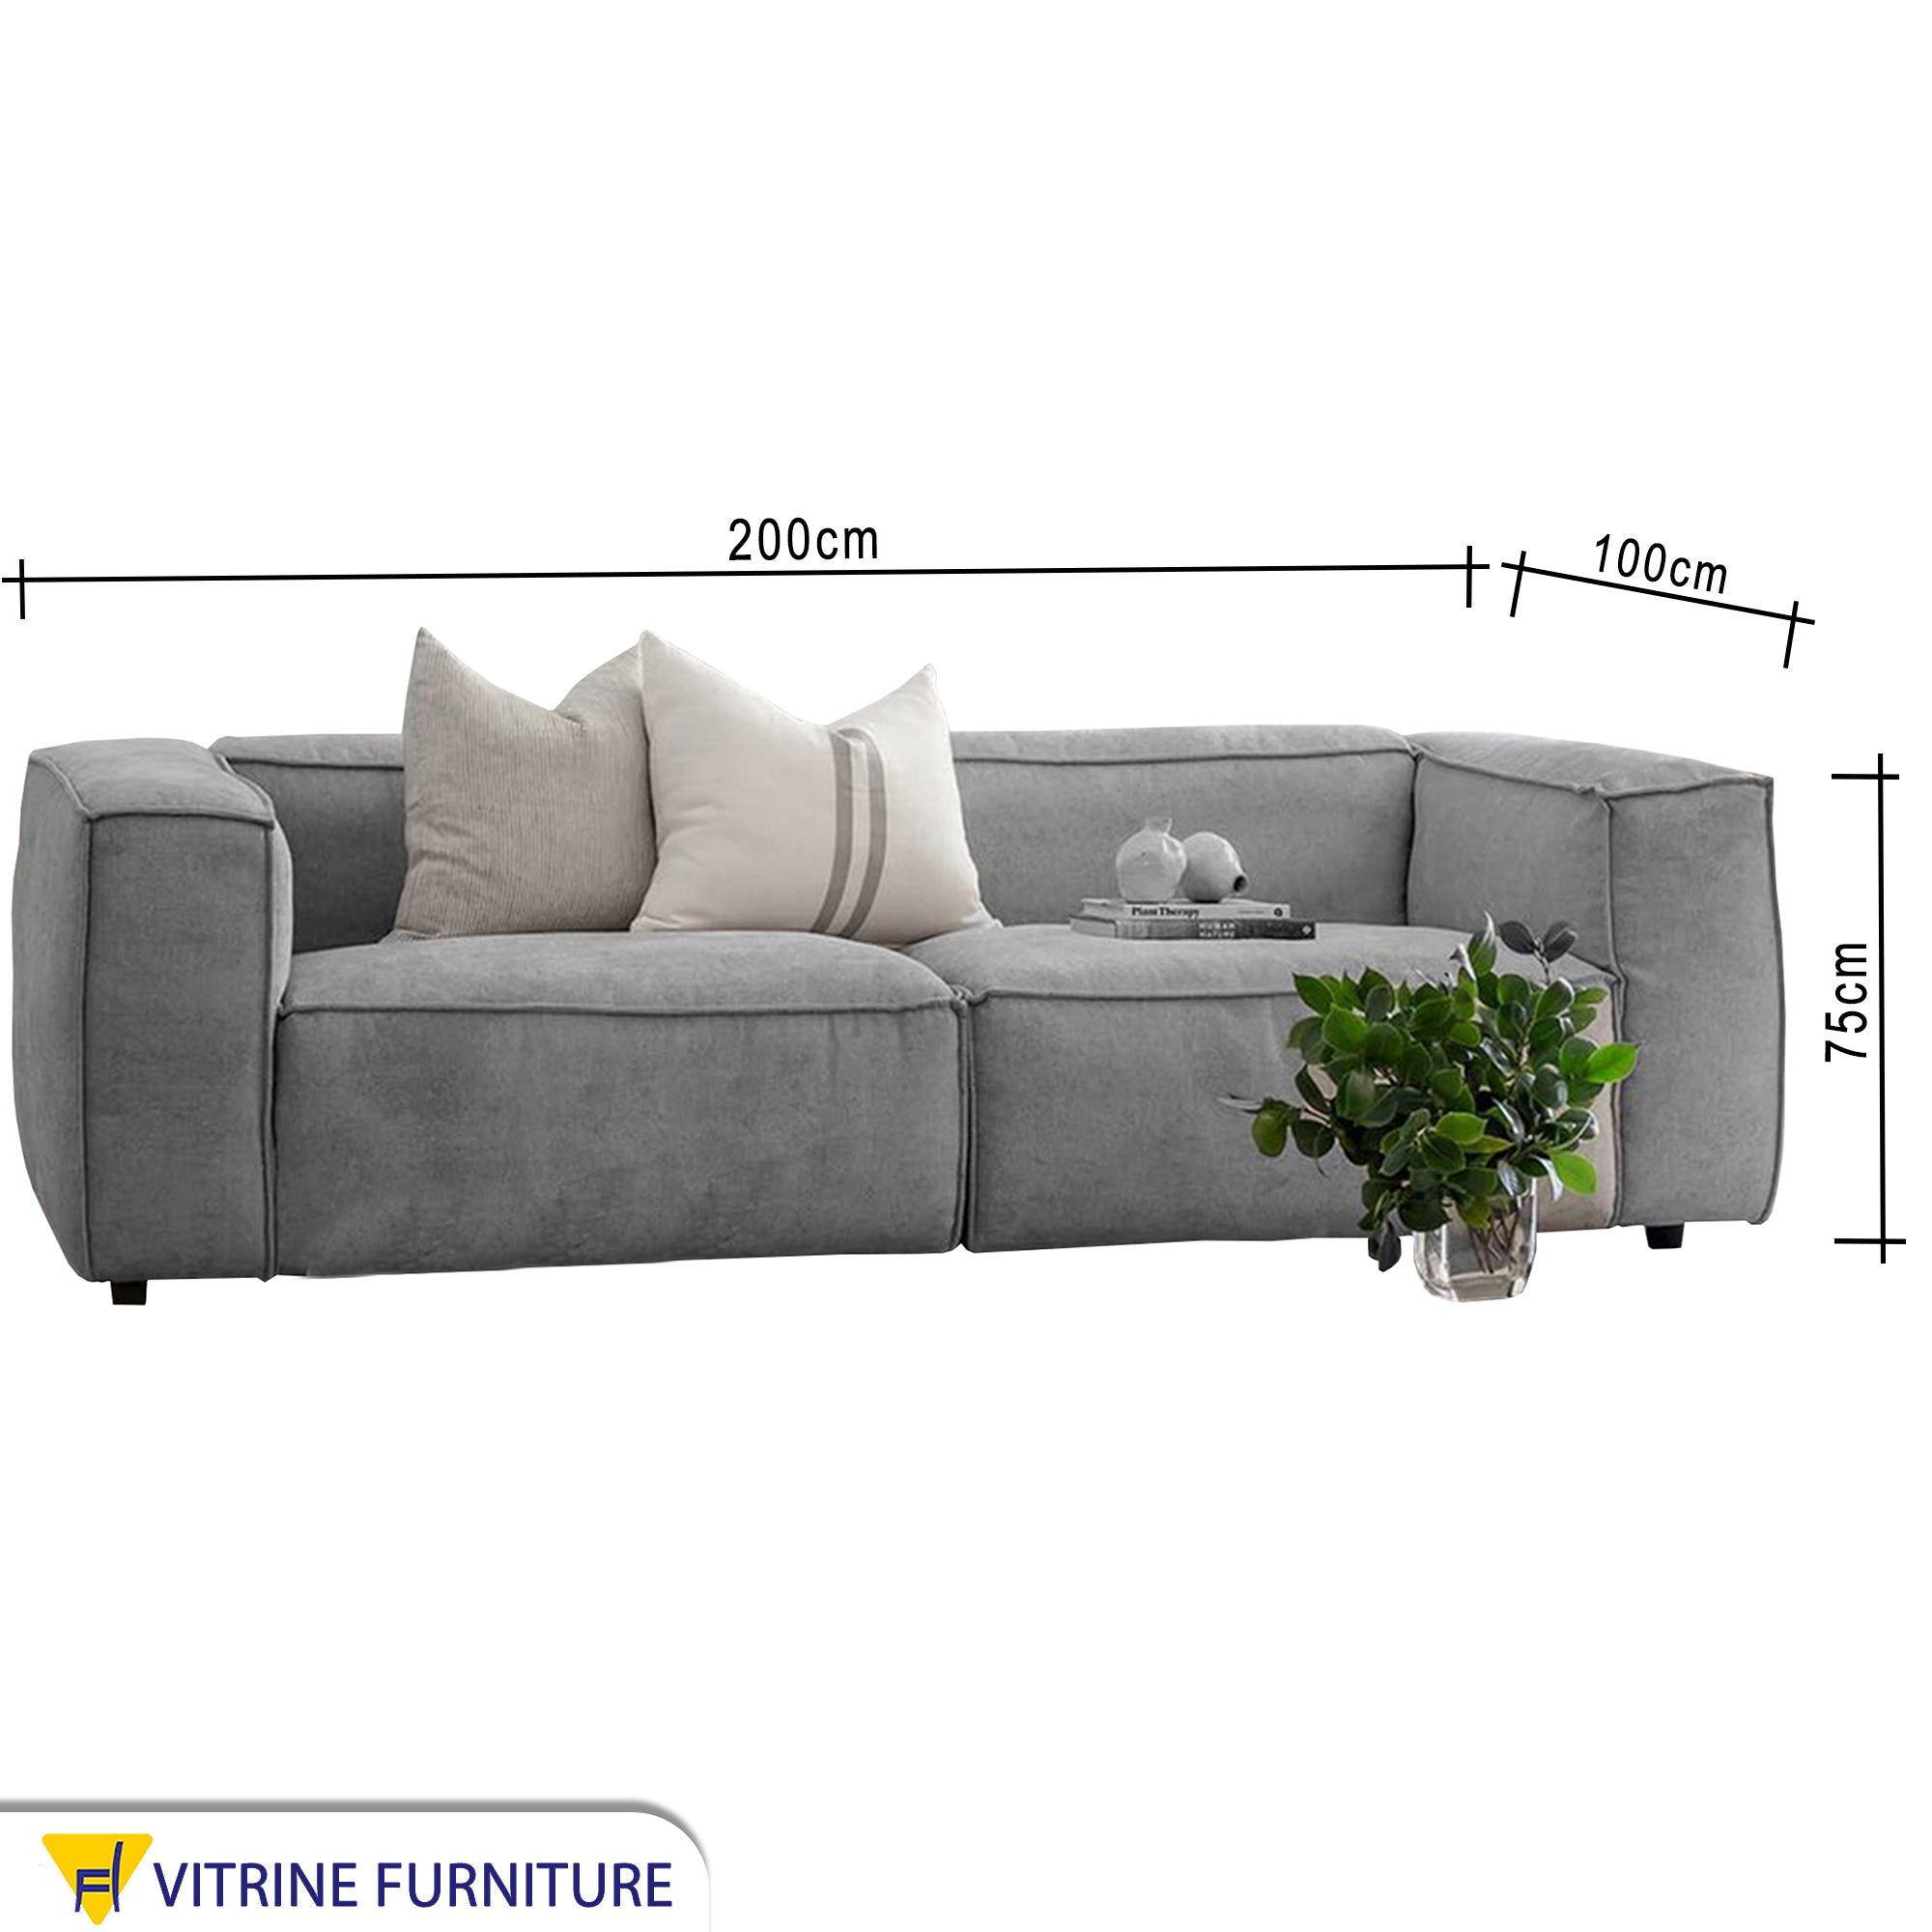 Comfortable sofa with low back